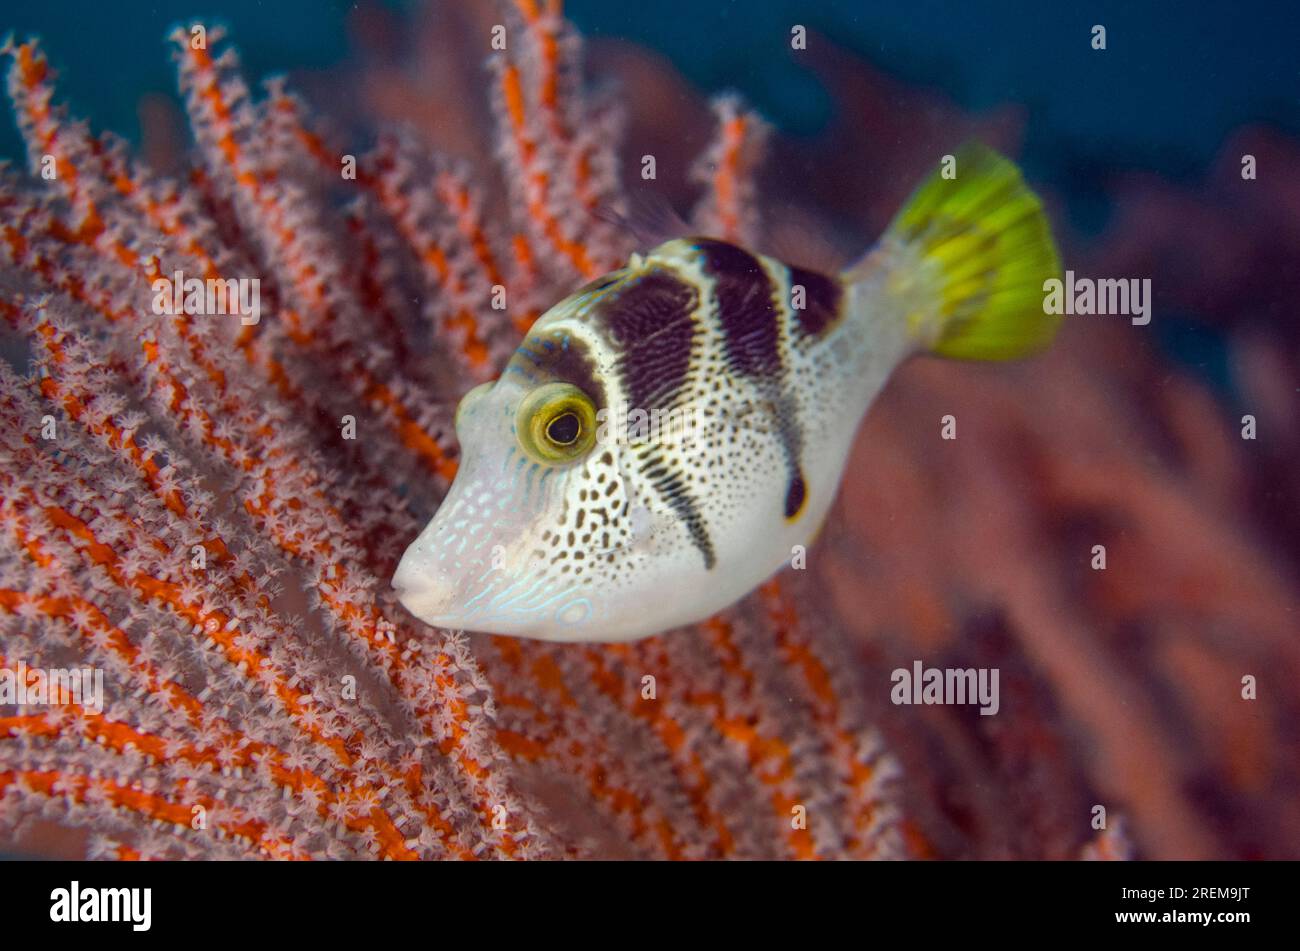 Mimic Filefish, Paraluteres prionurus, mimic the highly poisonous pufferfish Saddled Puffer (Canthigaster valentini) by sea fan, Jetty dive site, Pada Stock Photo